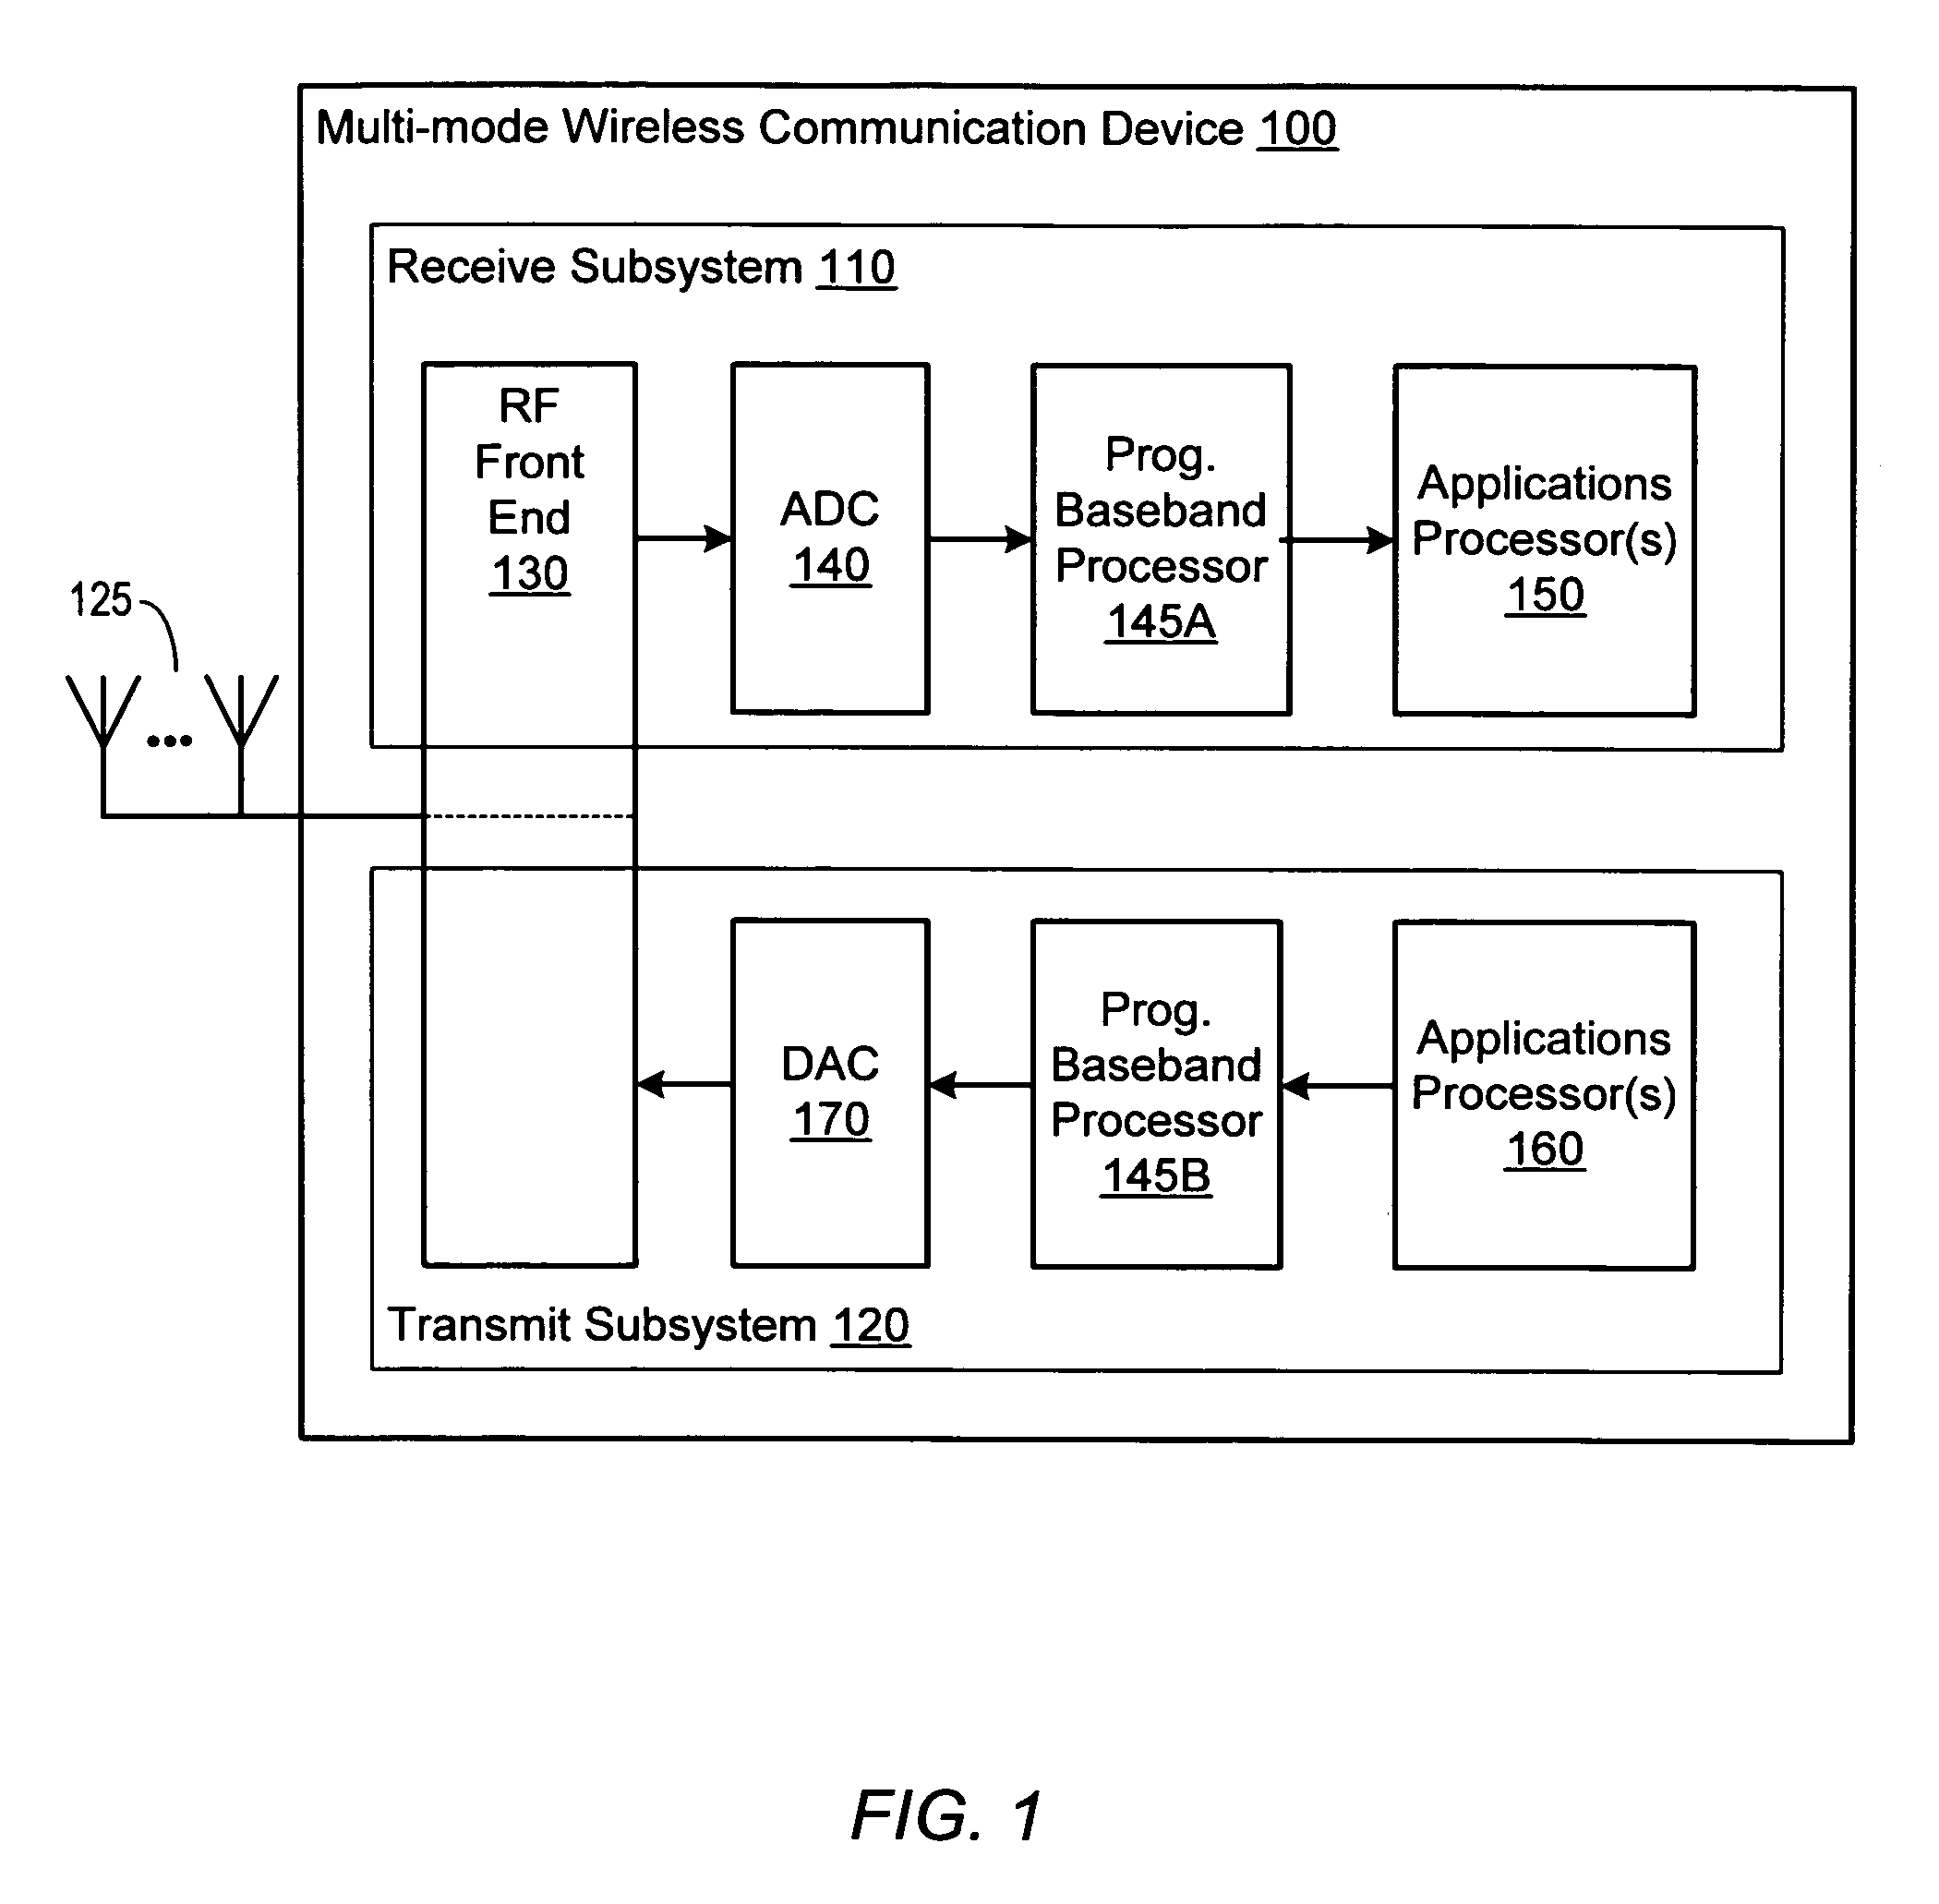 Complex vector executing clustered SIMD micro-architecture DSP with accelerator coupled complex ALU paths each further including short multiplier/accumulator using two's complement